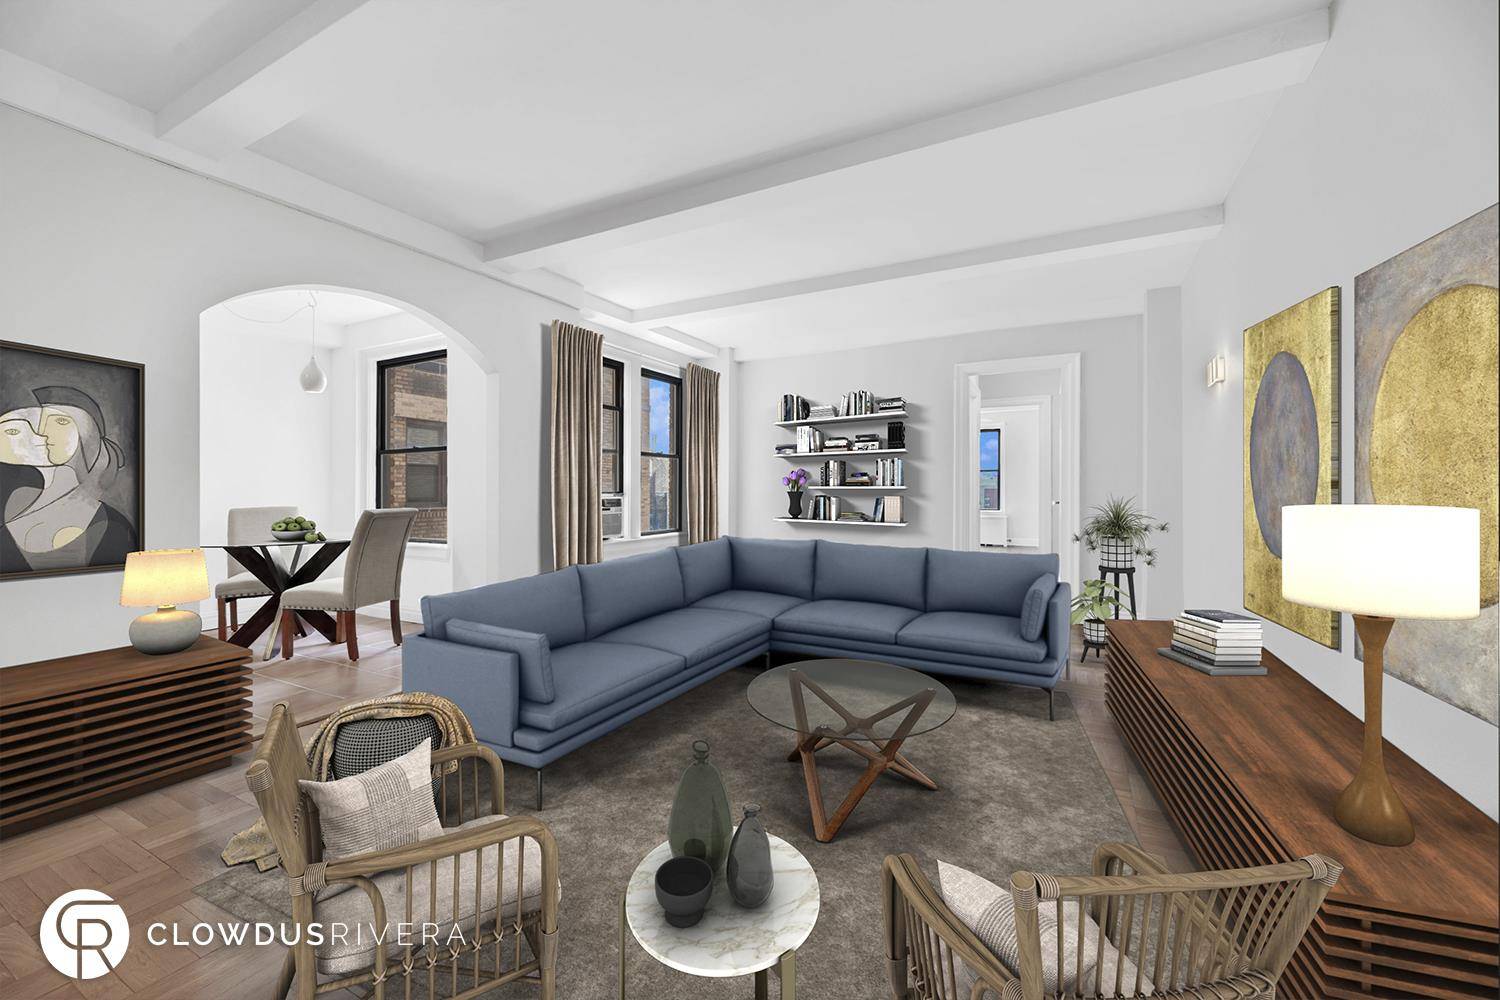 YOUR IMPRESSIVE, HIGH FLOOR SOUTHERN VIEWS AWAITTHE WESTWIND 175 WEST 93RD STREET, APT 16GYOUR HOMEThis sun drenched, high floor home in The Westwind one of the Upper West Side s ...